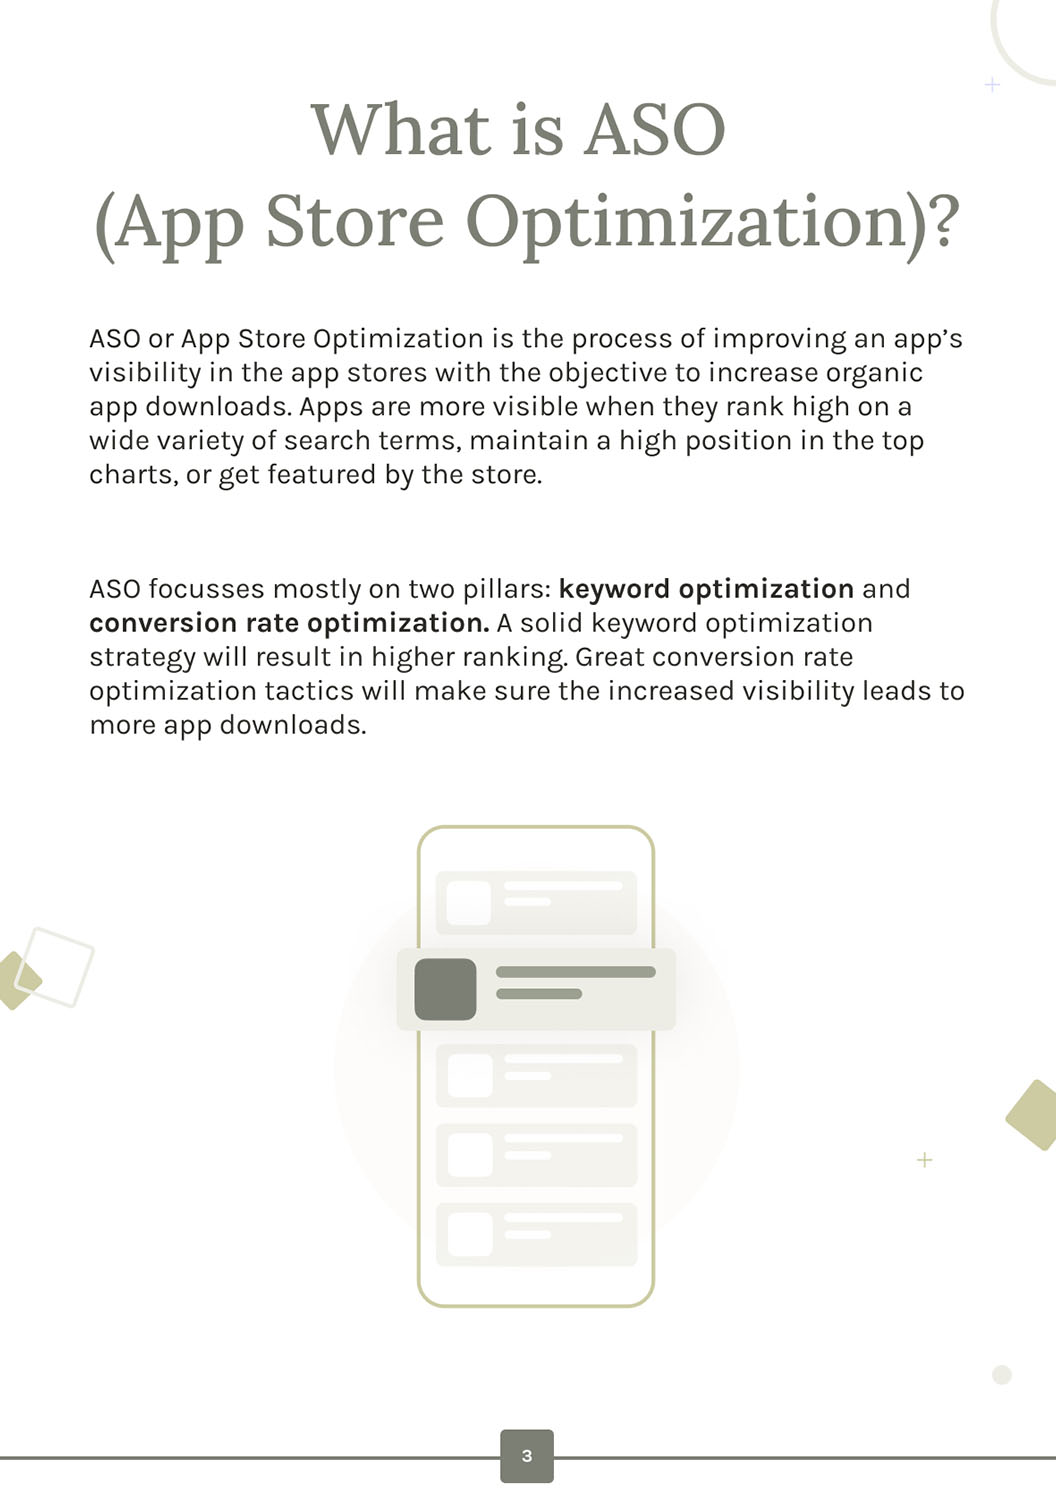 The Beginners Guide to App Store Optimization